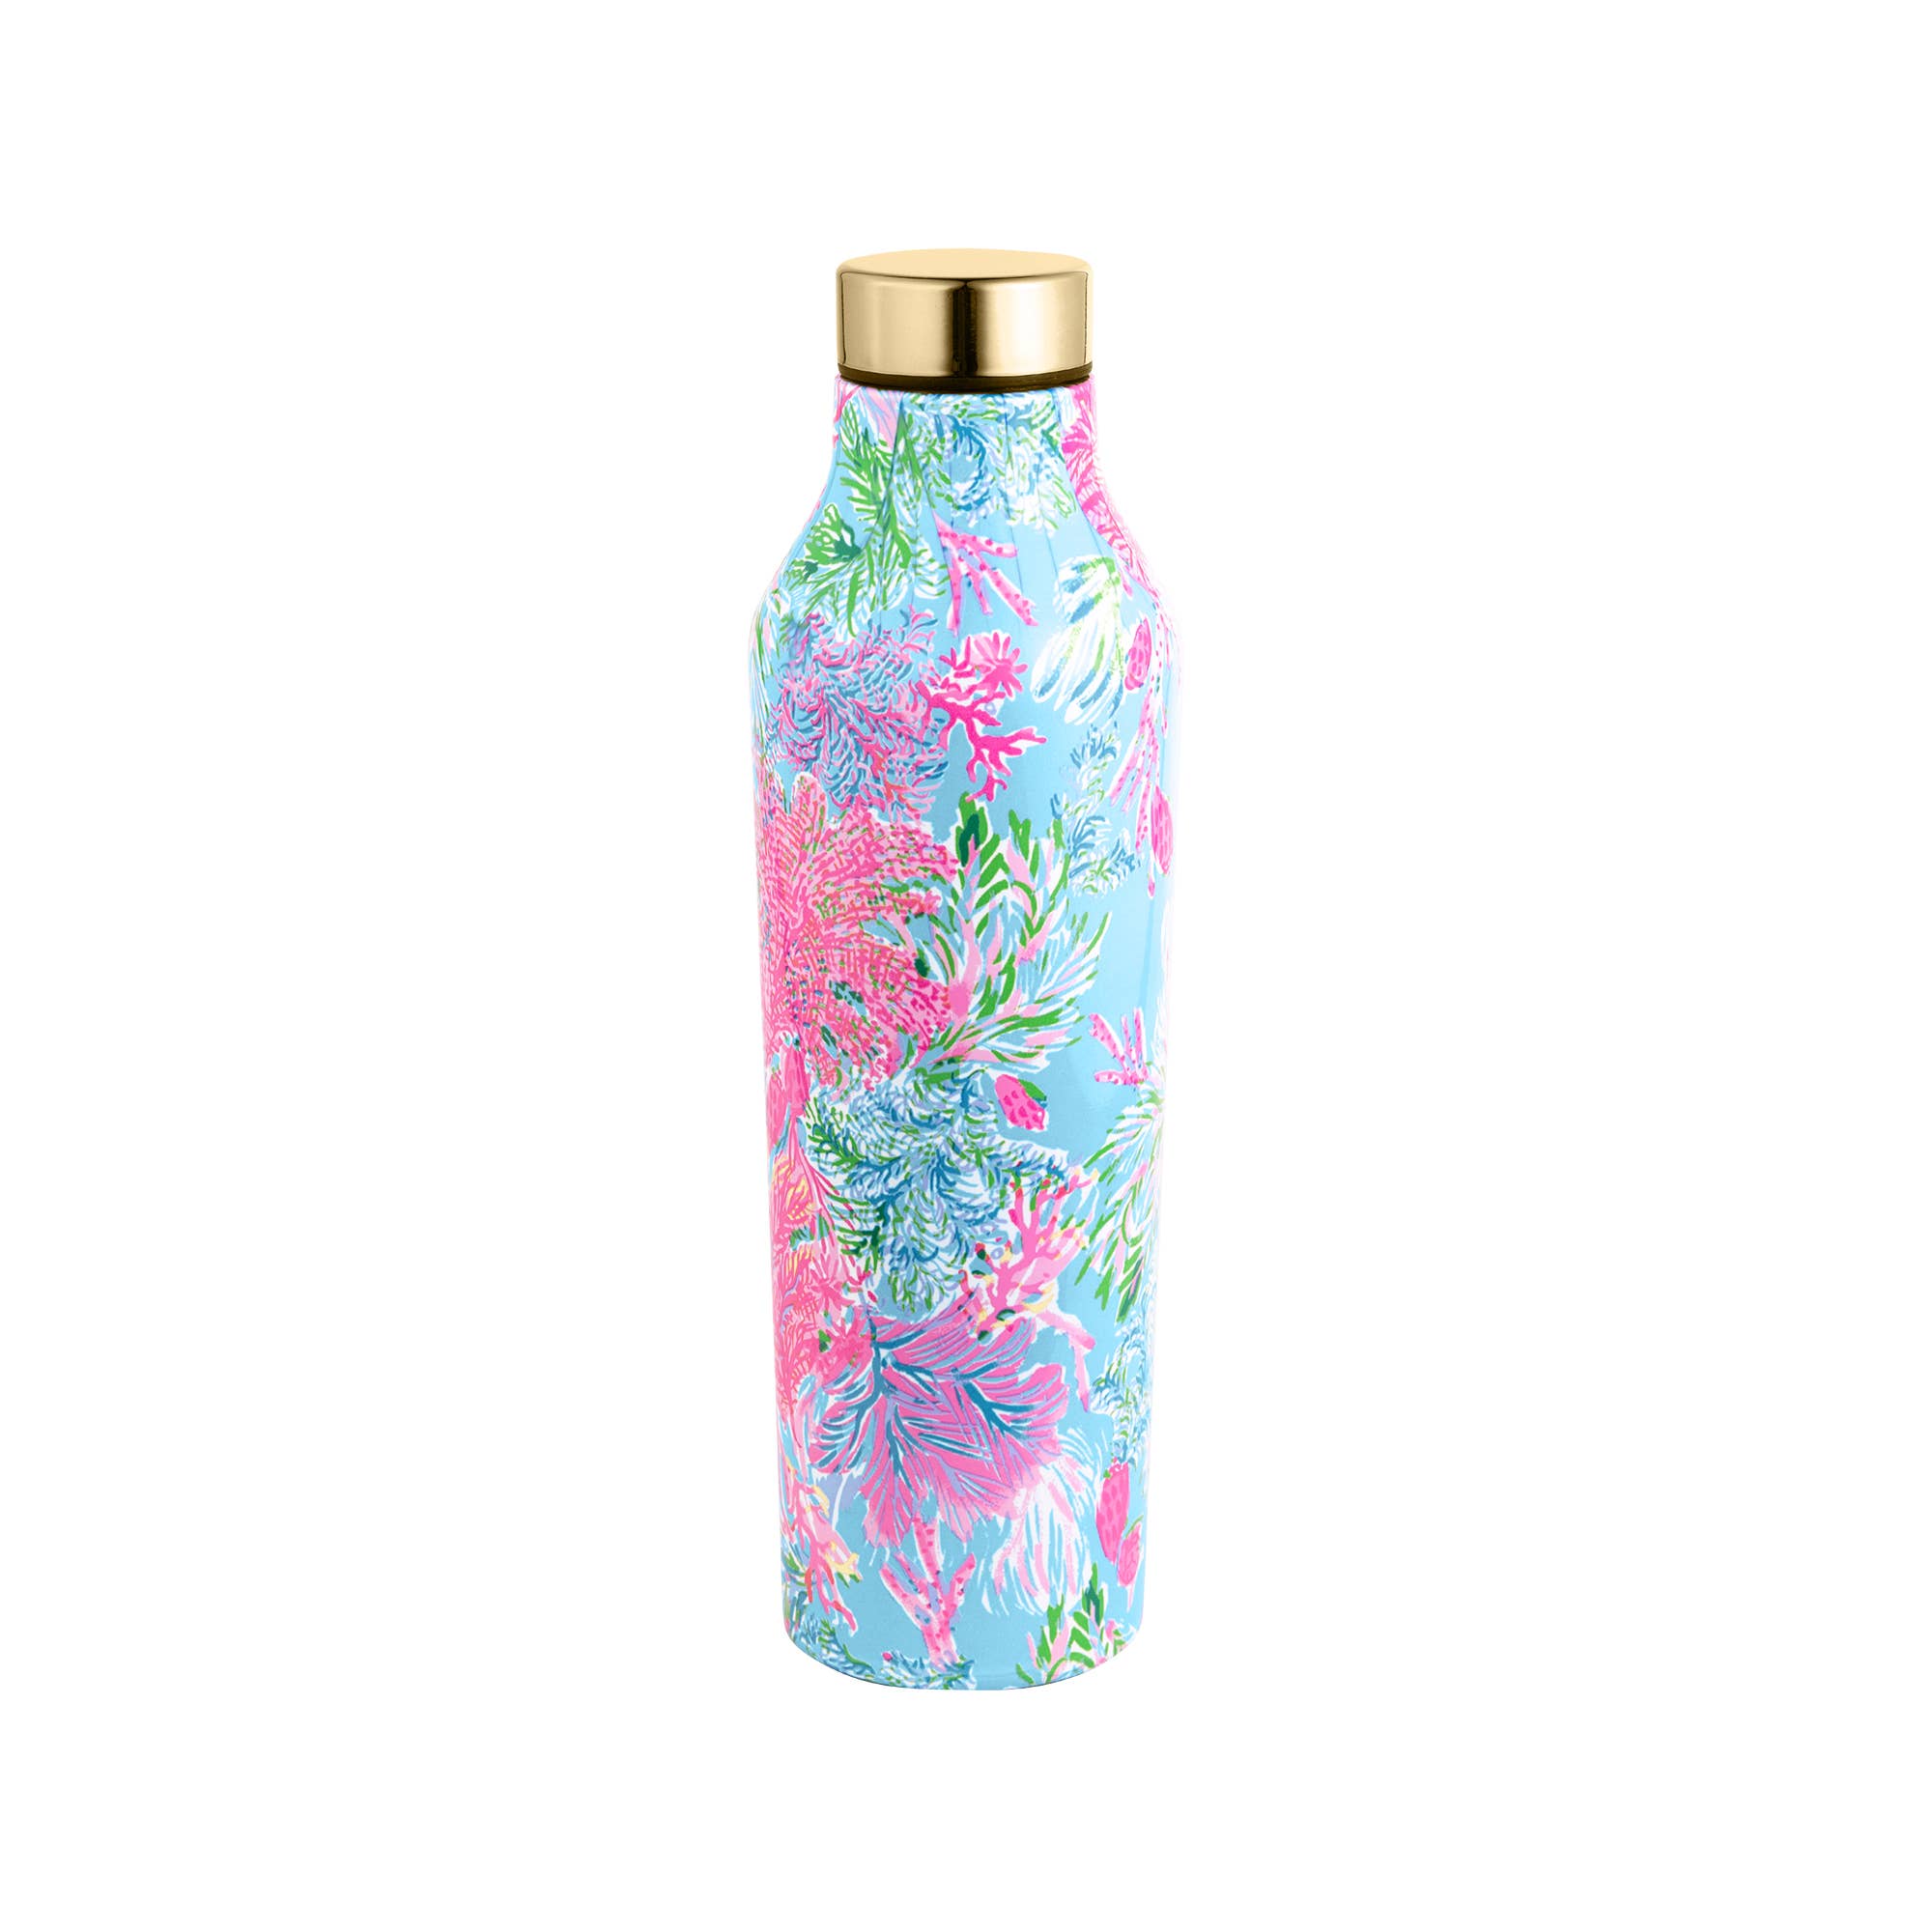 Lilly Pulitzer Stainless Steel Water Bottle- Cay to my Heart